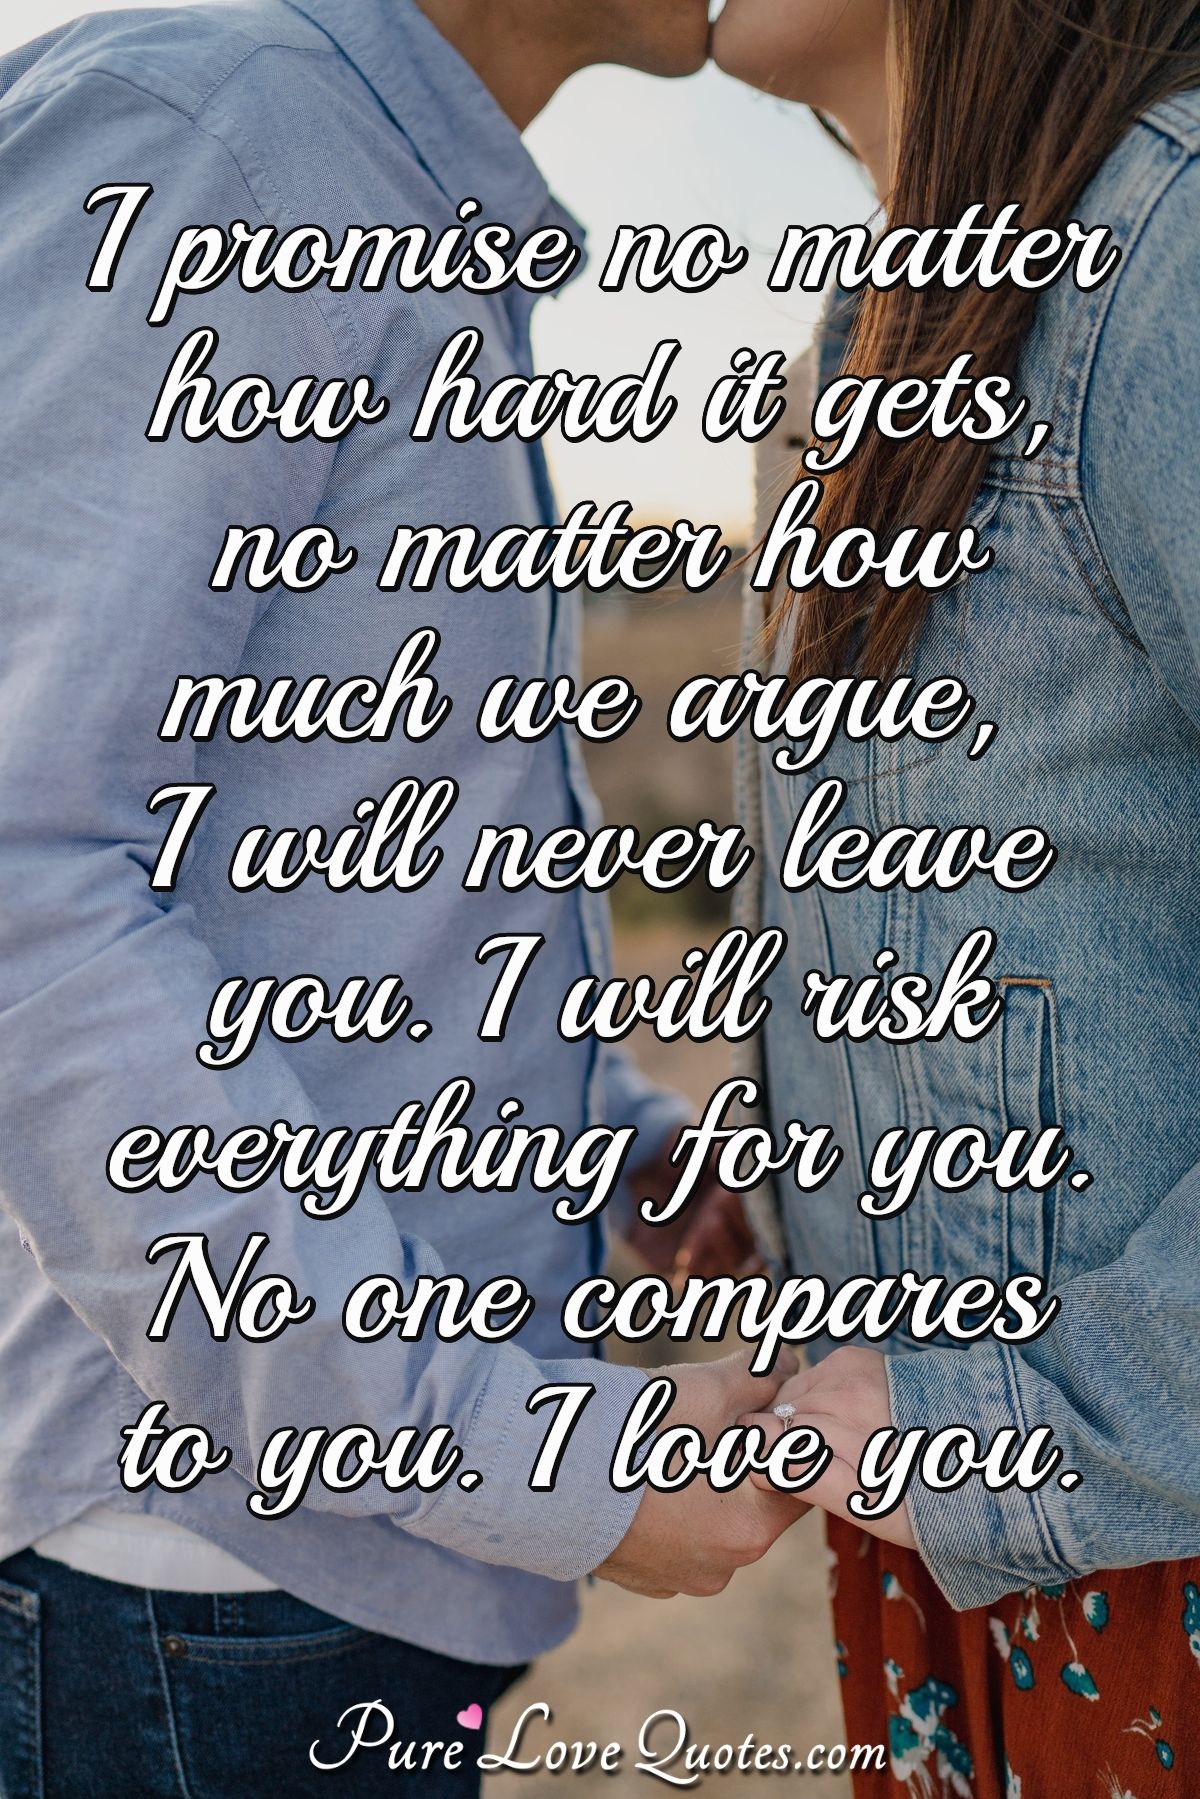 I promise no matter how hard it gets, no matter how much we argue, I will never leave you. I will risk everything for you. No one compares to you. I love you. - Anonymous